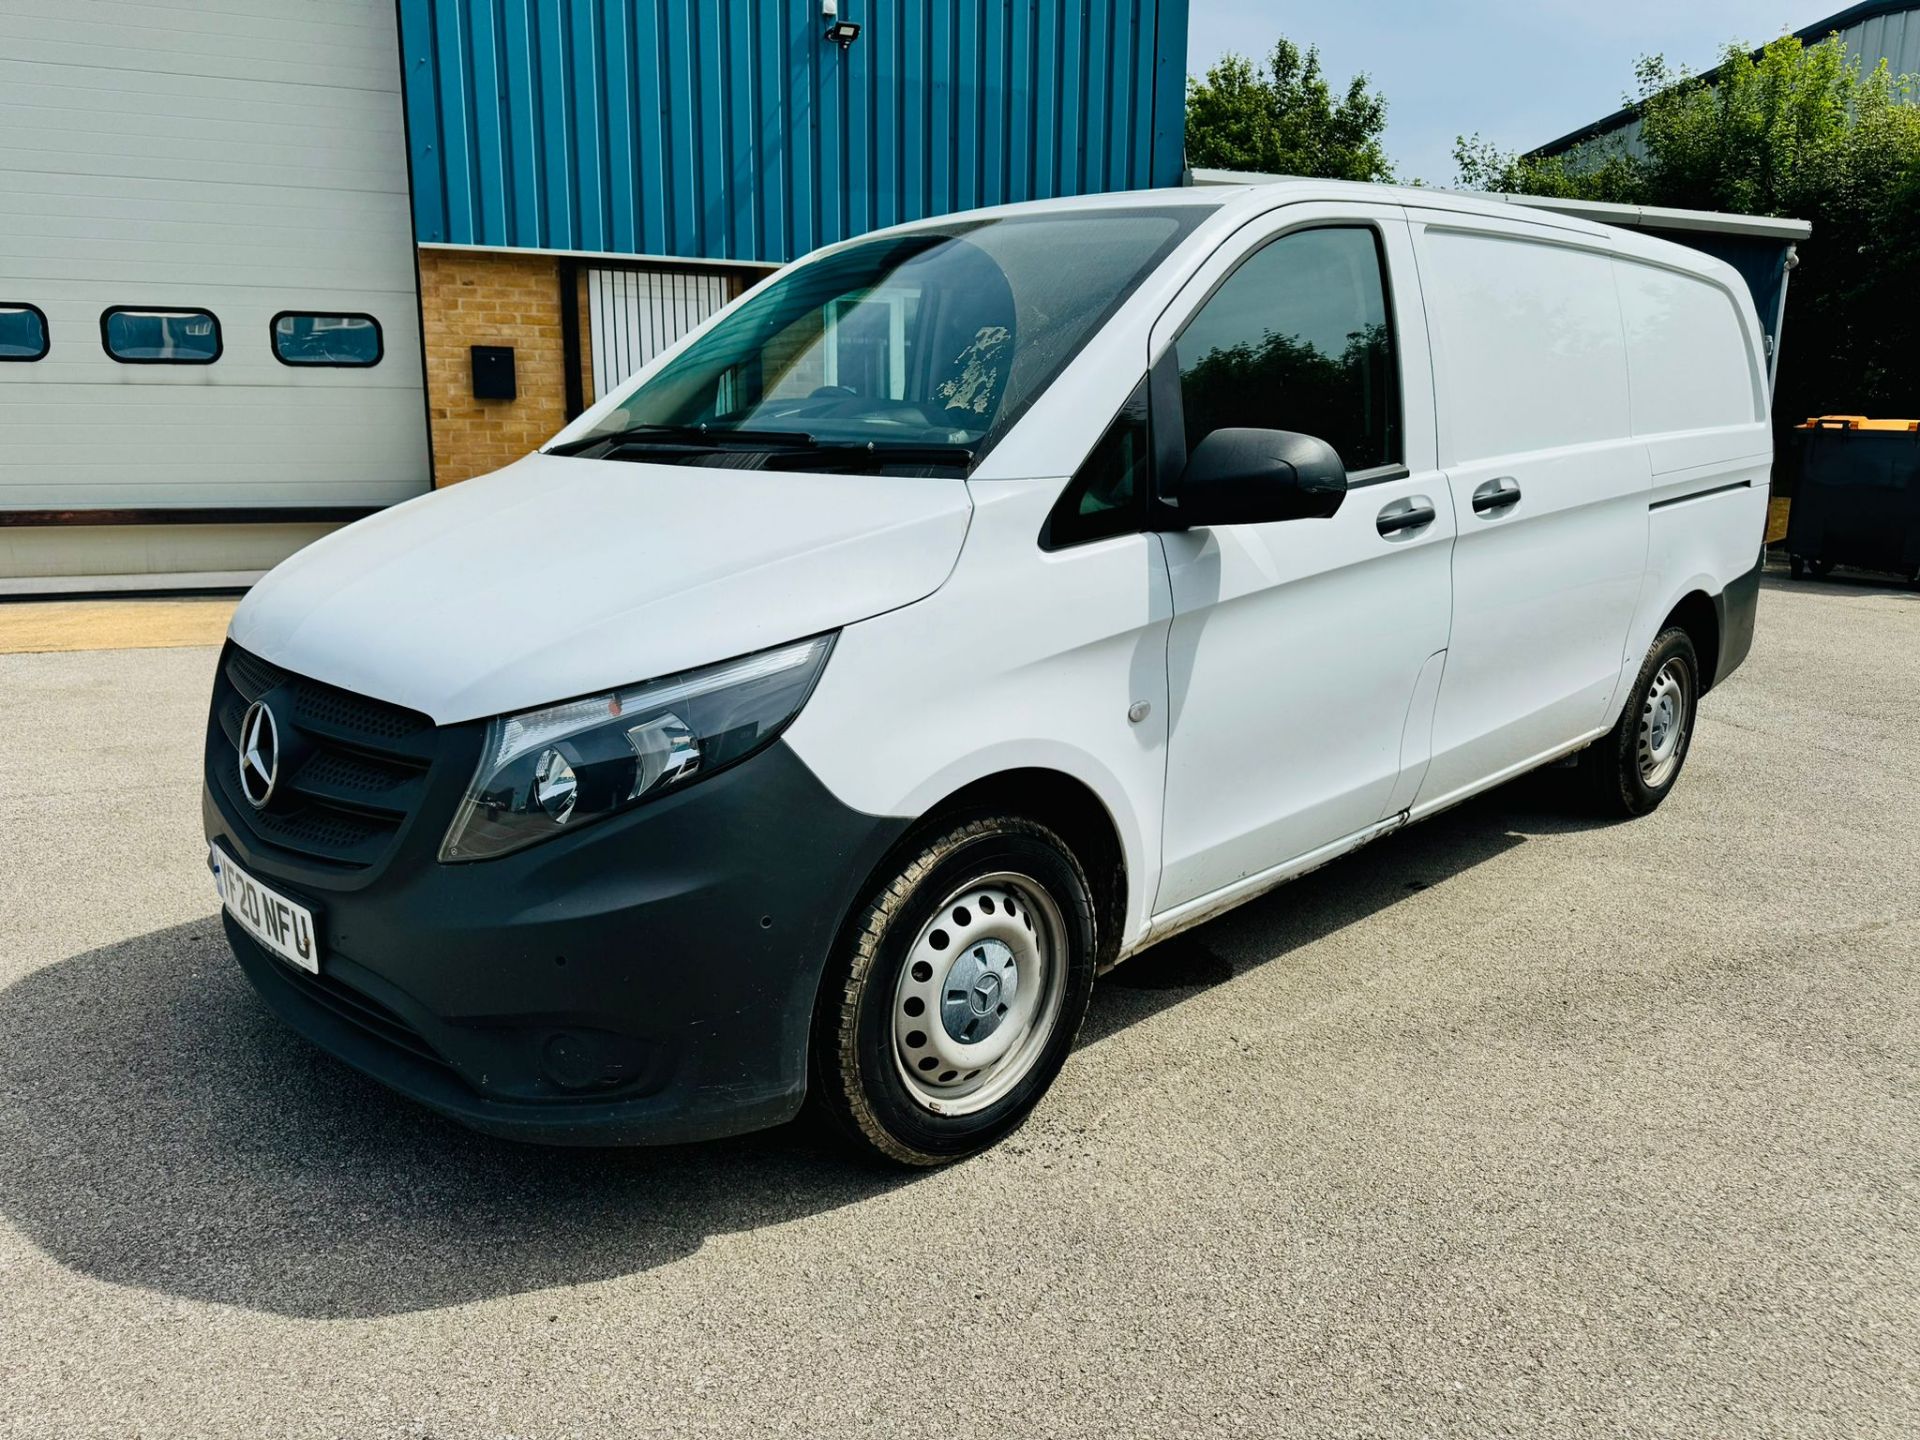 MERCEDES BENZ VITO CDI PURE - 2020 20 Reg - Only 74k Miles - 1 Owner From New - Parking Sensors - Image 9 of 21